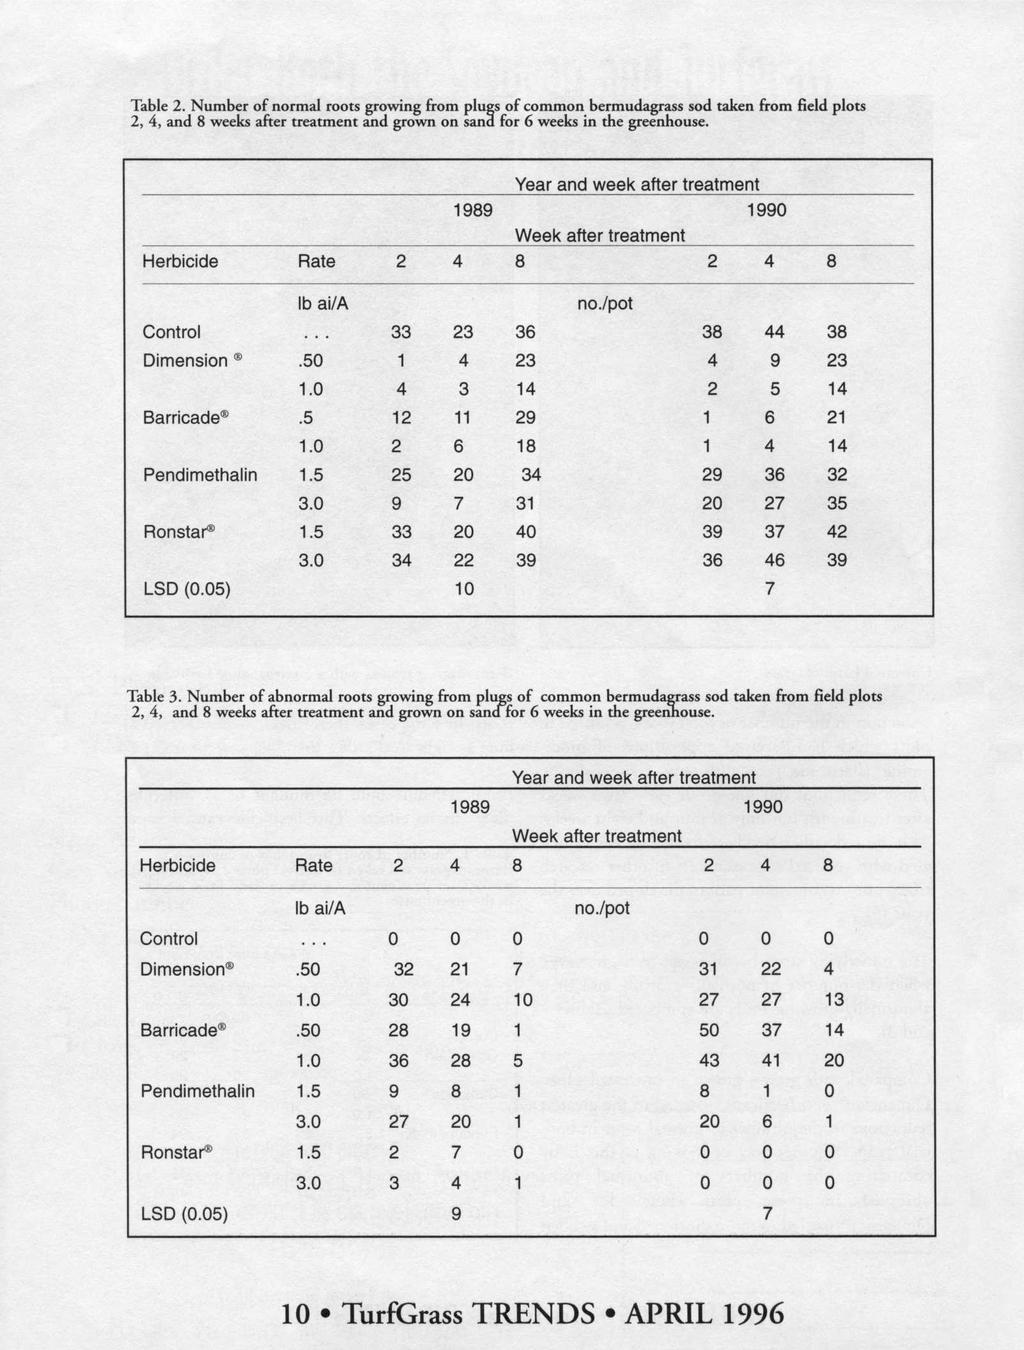 Table 2. Number of normal roots growing from plugs of common bermudagrass sod taken from field plots 2, 4, and 8 weeks after treatment and grown on sand for 6 weeks in the greenhouse.